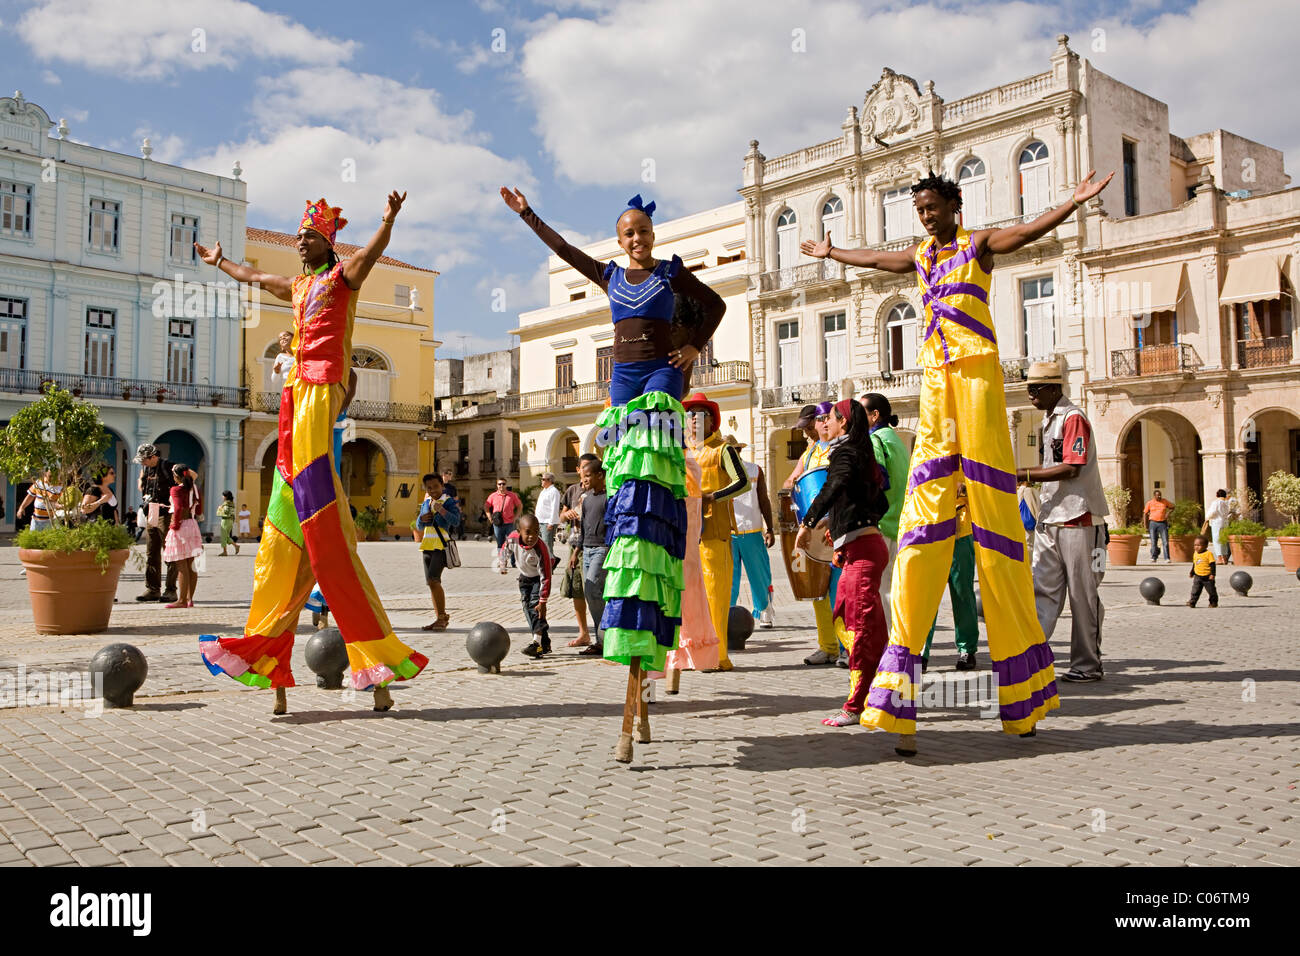 A group of street artist or performers parading on stilts walk through the streets of Havana, Cuba in bright colourful costumes Stock Photo